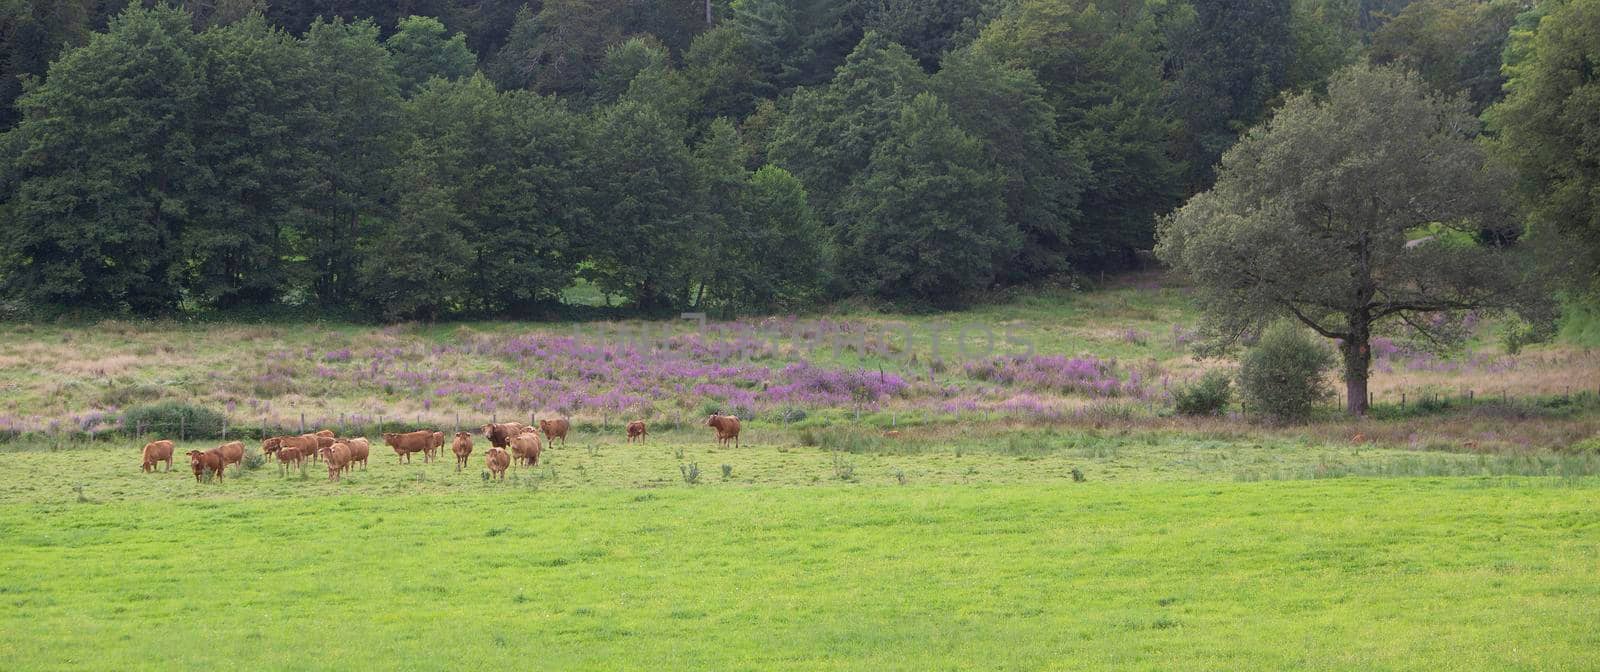 group of limousin cows in france near heather and forest by ahavelaar